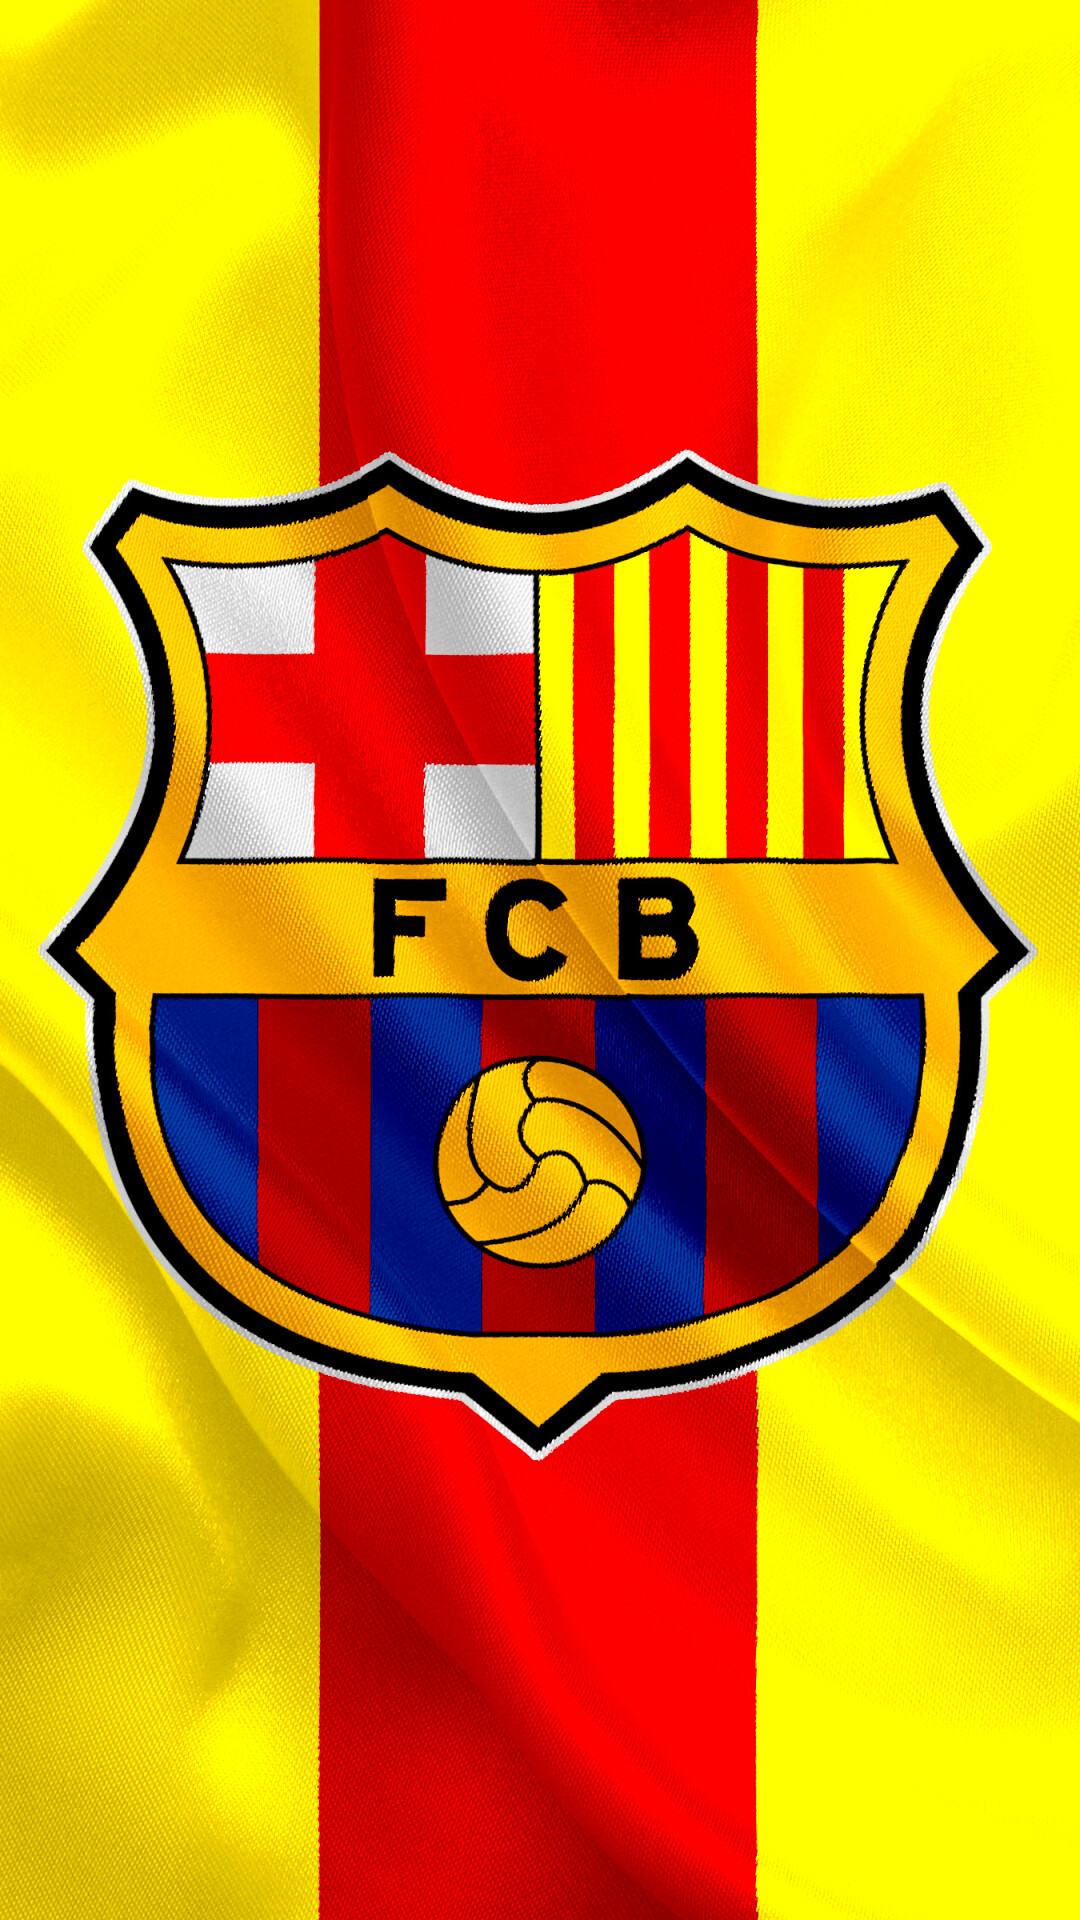 FC Barcelona: The club started by a Swiss entrepreneur, Hans Gamper. 1080x1920 Full HD Background.